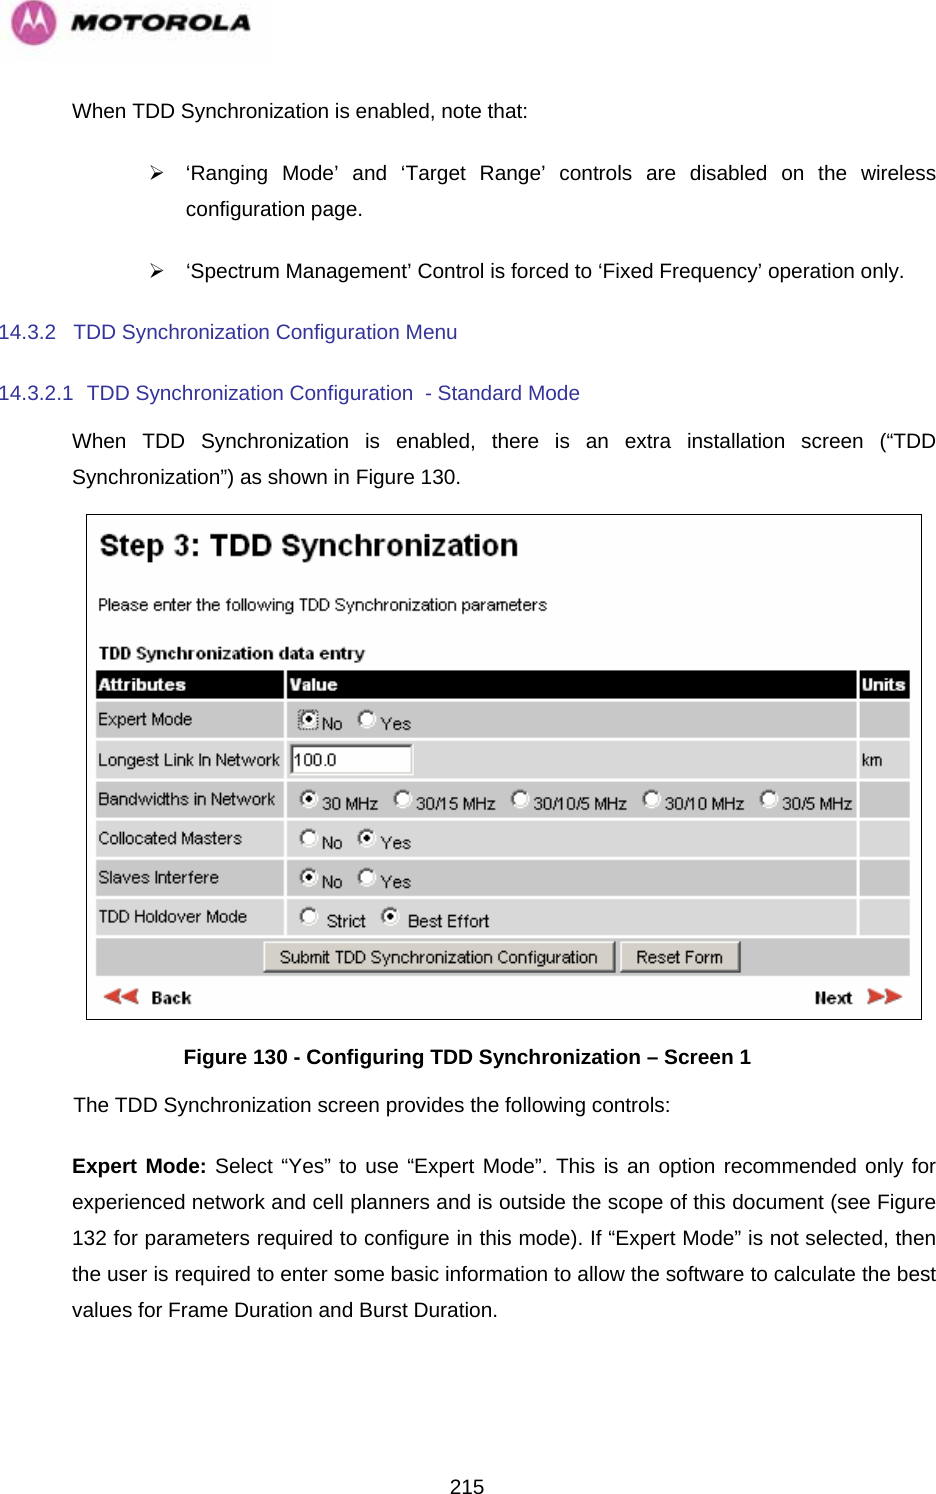   215When TDD Synchronization is enabled, note that: ¾  ‘Ranging Mode’ and ‘Target Range’ controls are disabled on the wireless configuration page. ¾  ‘Spectrum Management’ Control is forced to ‘Fixed Frequency’ operation only. 14.3.2 TDD Synchronization Configuration Menu 14.3.2.1  TDD Synchronization Configuration  - Standard Mode When TDD Synchronization is enabled, there is an extra installation screen (“TDD Synchronization”) as shown in Figure 130.  Figure 130 - Configuring TDD Synchronization – Screen 1 The TDD Synchronization screen provides the following controls: Expert Mode: Select “Yes” to use “Expert Mode”. This is an option recommended only for experienced network and cell planners and is outside the scope of this document (see Figure 132 for parameters required to configure in this mode). If “Expert Mode” is not selected, then the user is required to enter some basic information to allow the software to calculate the best values for Frame Duration and Burst Duration.   